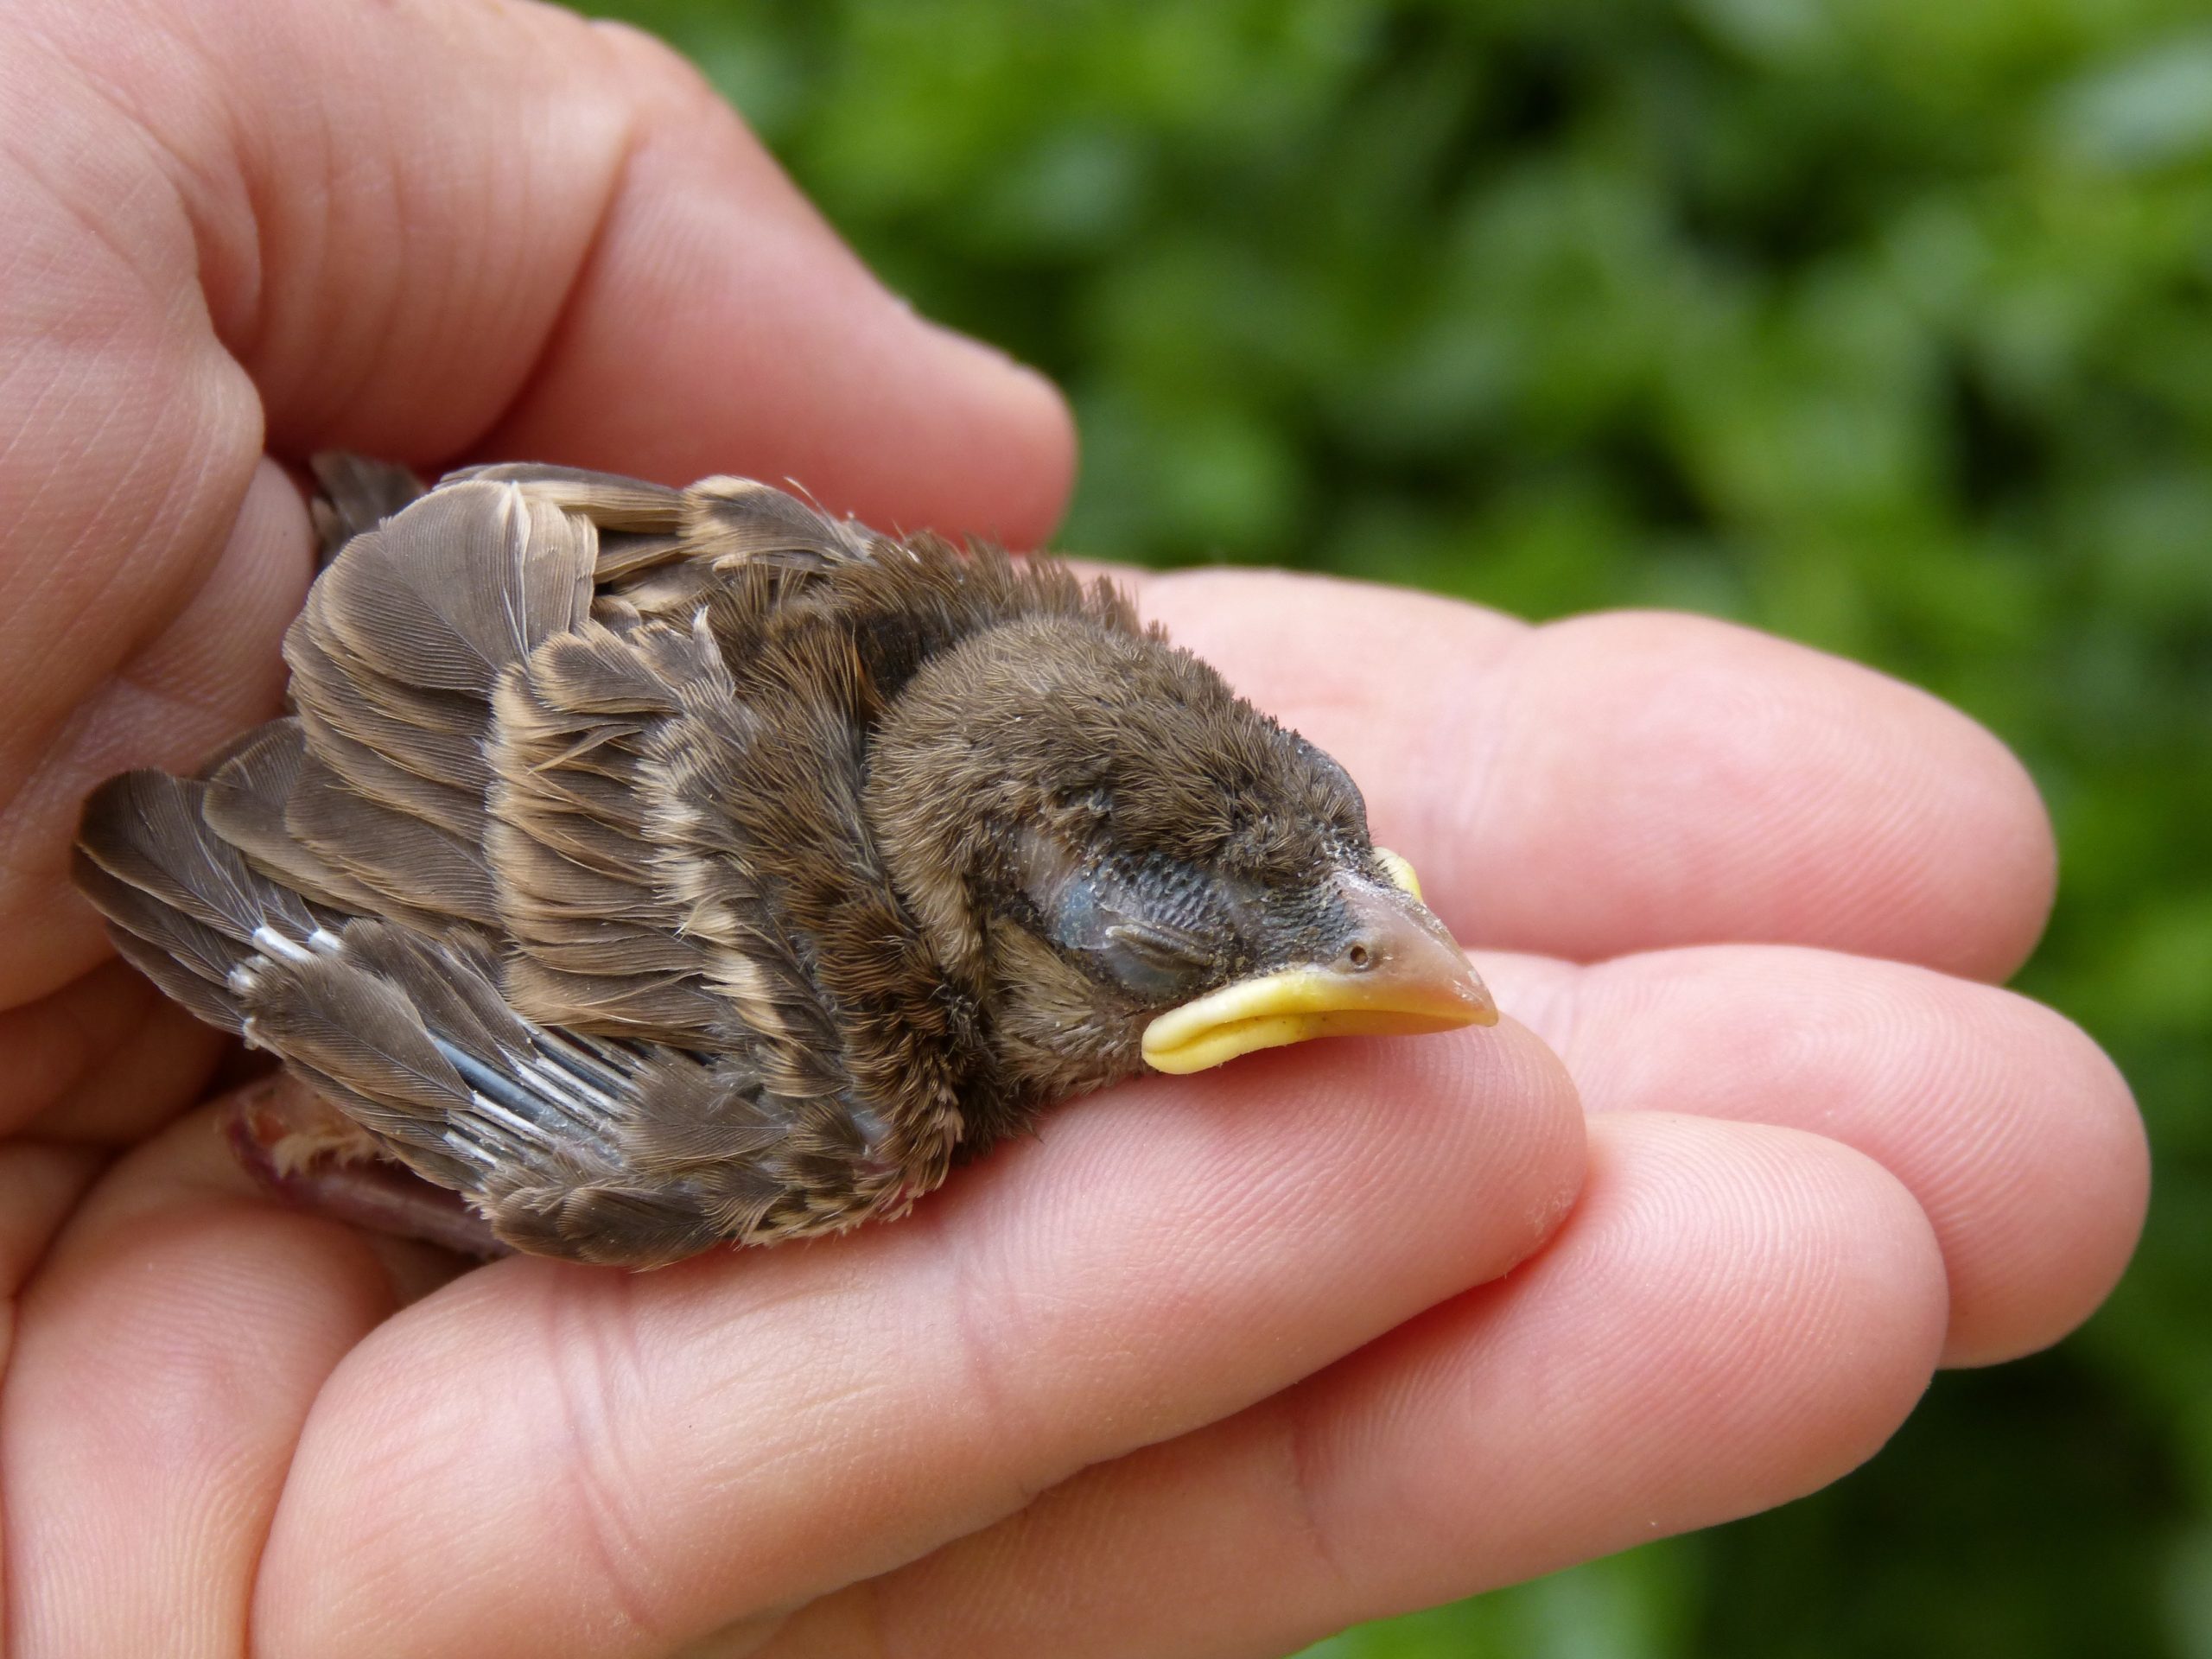 Proven Hoaxes That People Still Believe - baby bird sparrow